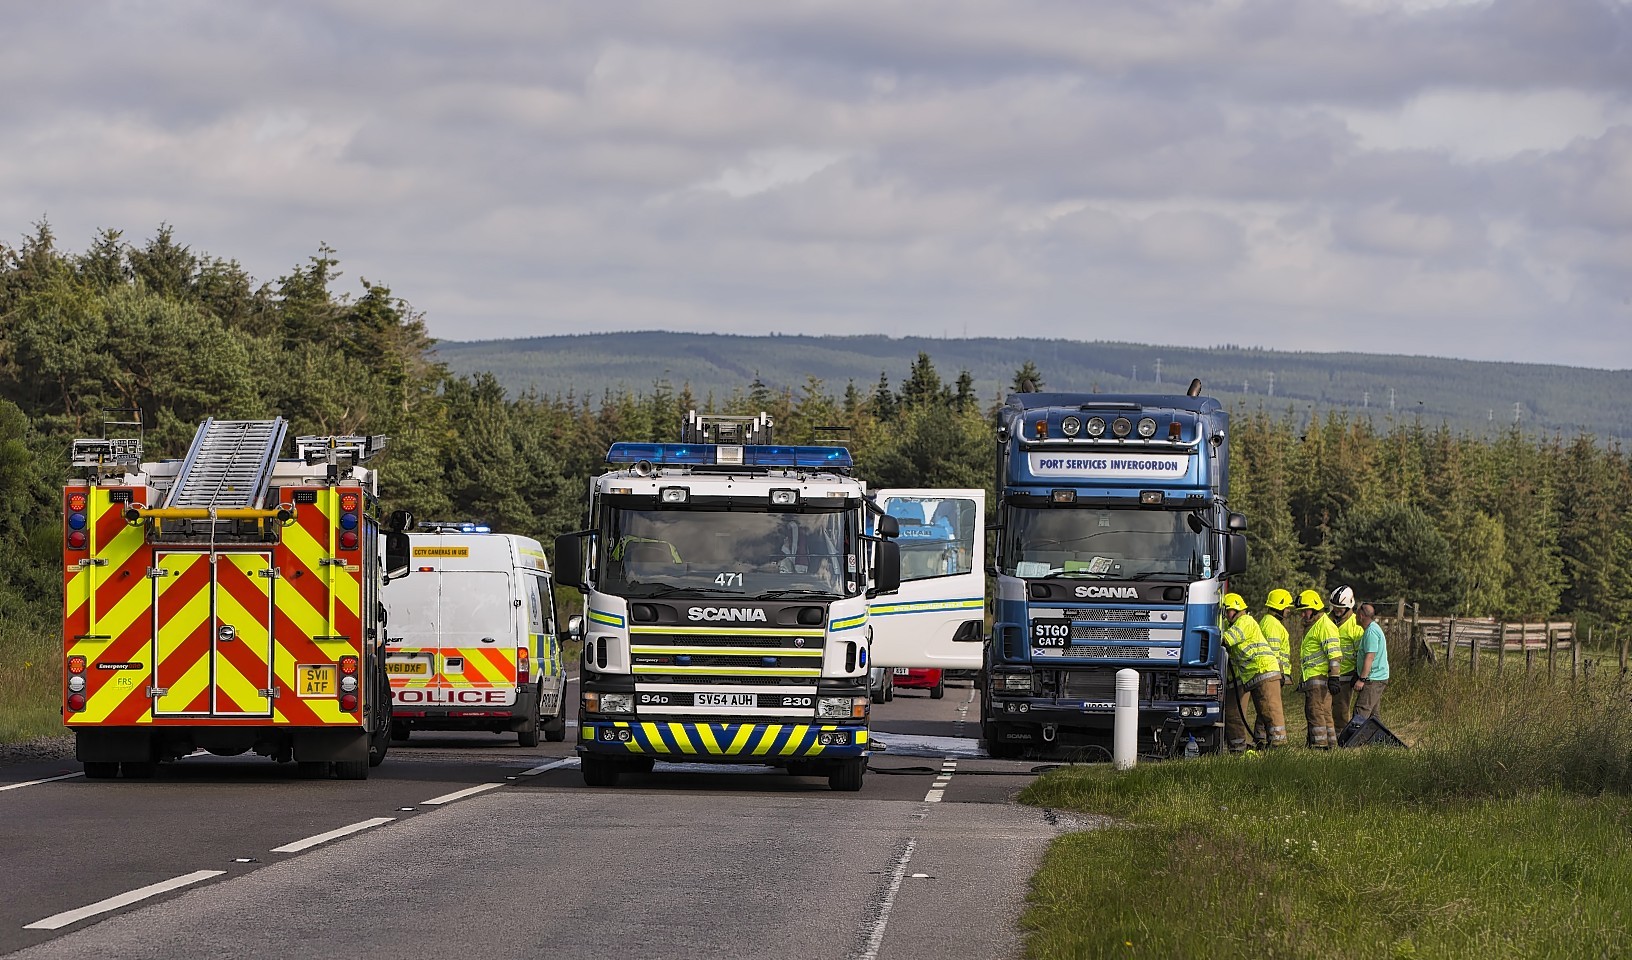 The lorry on fire on the A96 in Moray